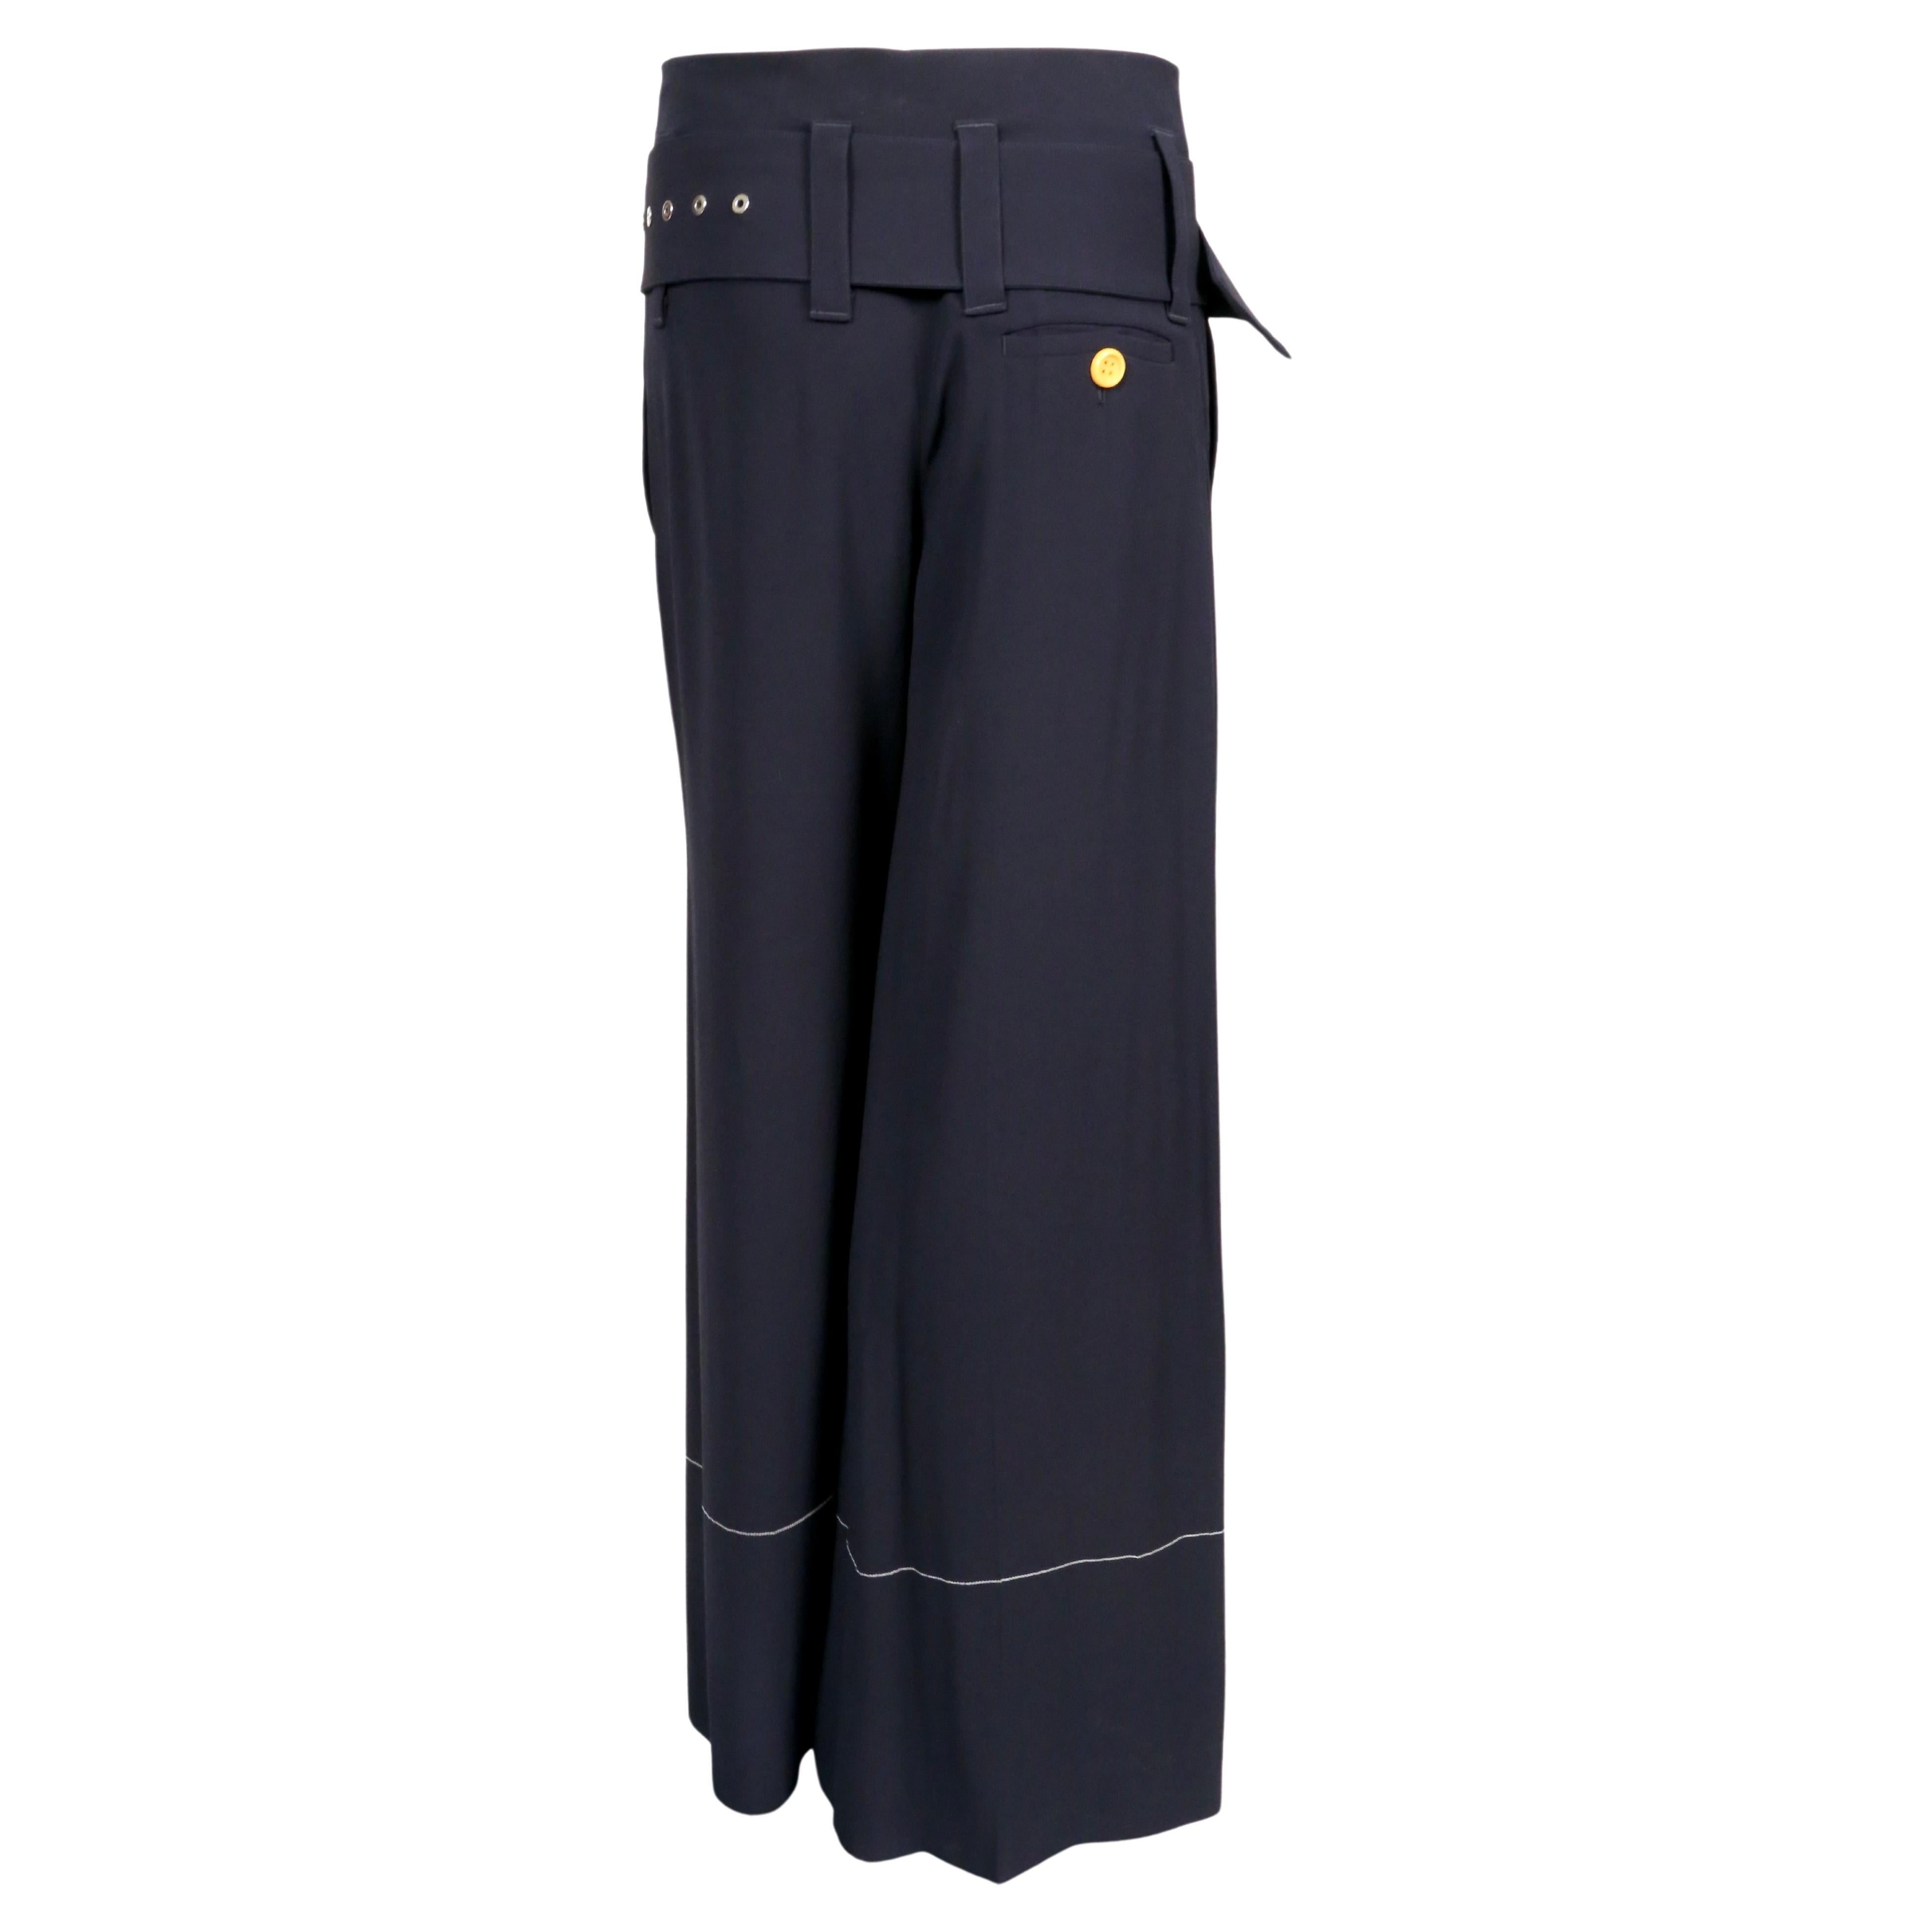 Navy blue pants with wide leg and belt designed by Phoebe Philo for Celine.  French size 36. Approximate measurements: waist 28